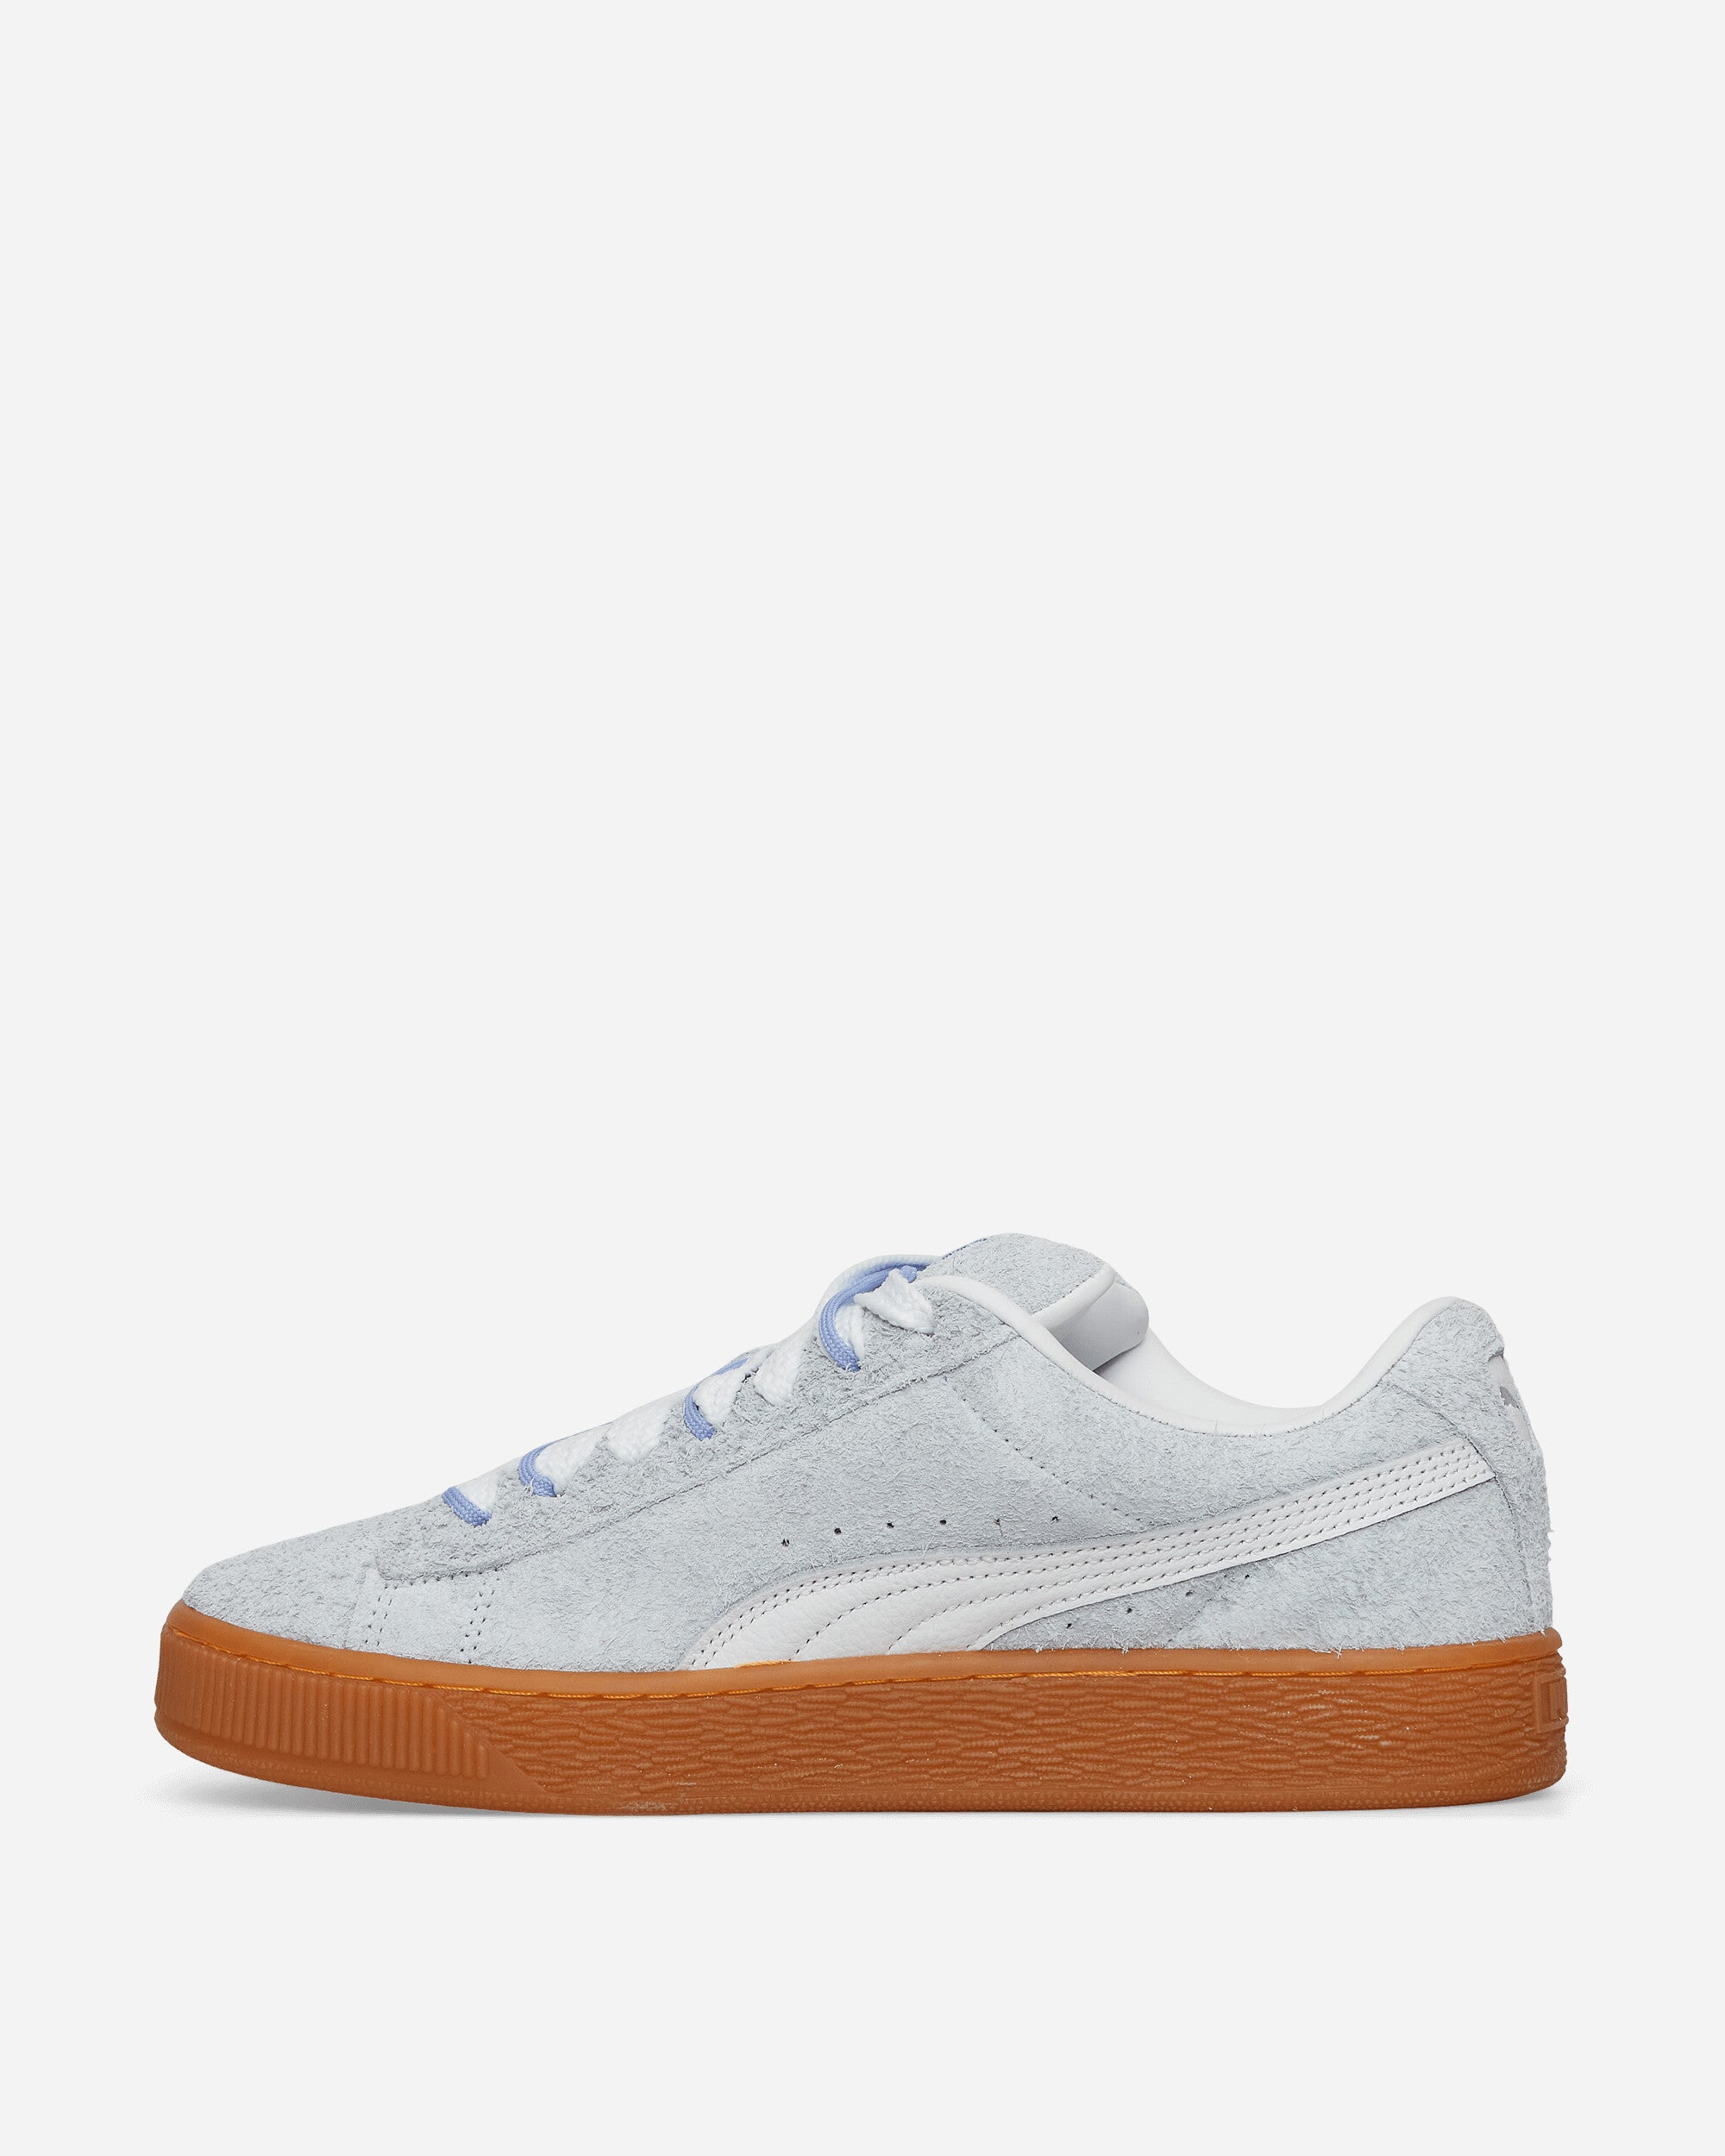 Puma Wmns Suede Xl Thick N Thin Light Blue/White Sneakers Low 398325-01